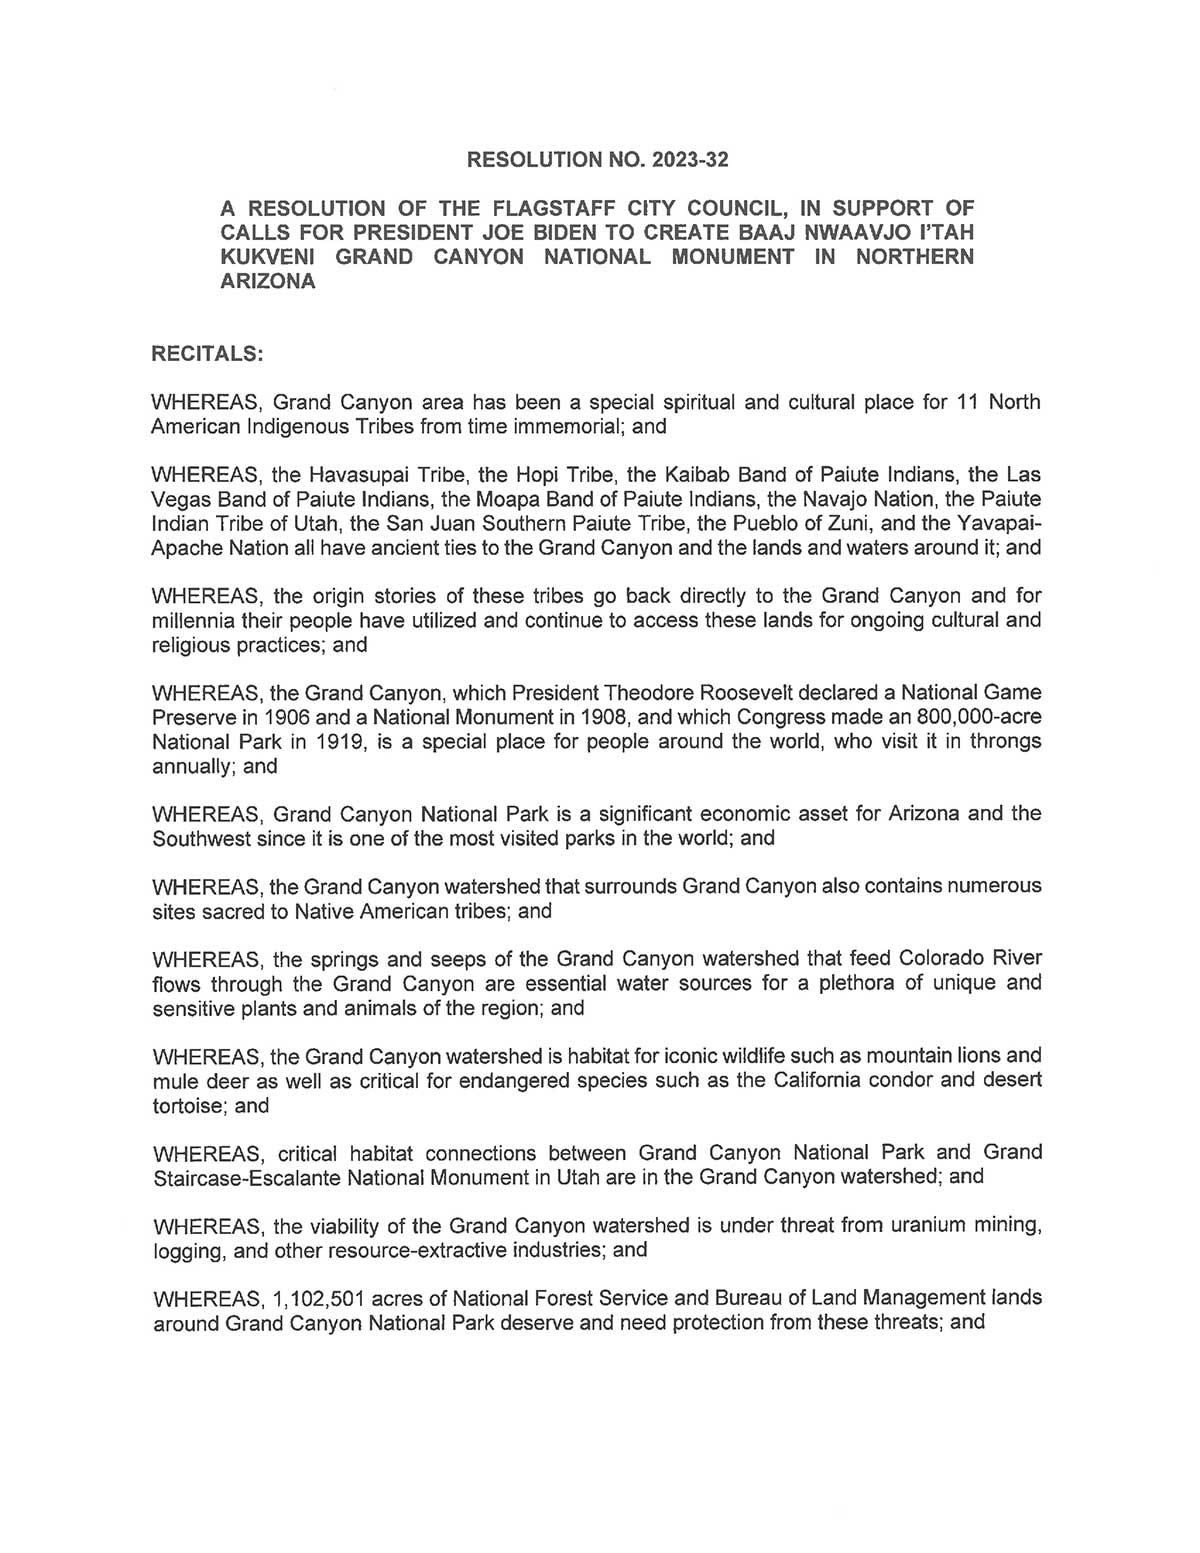 Read the full resolution of Flagstaff City Council